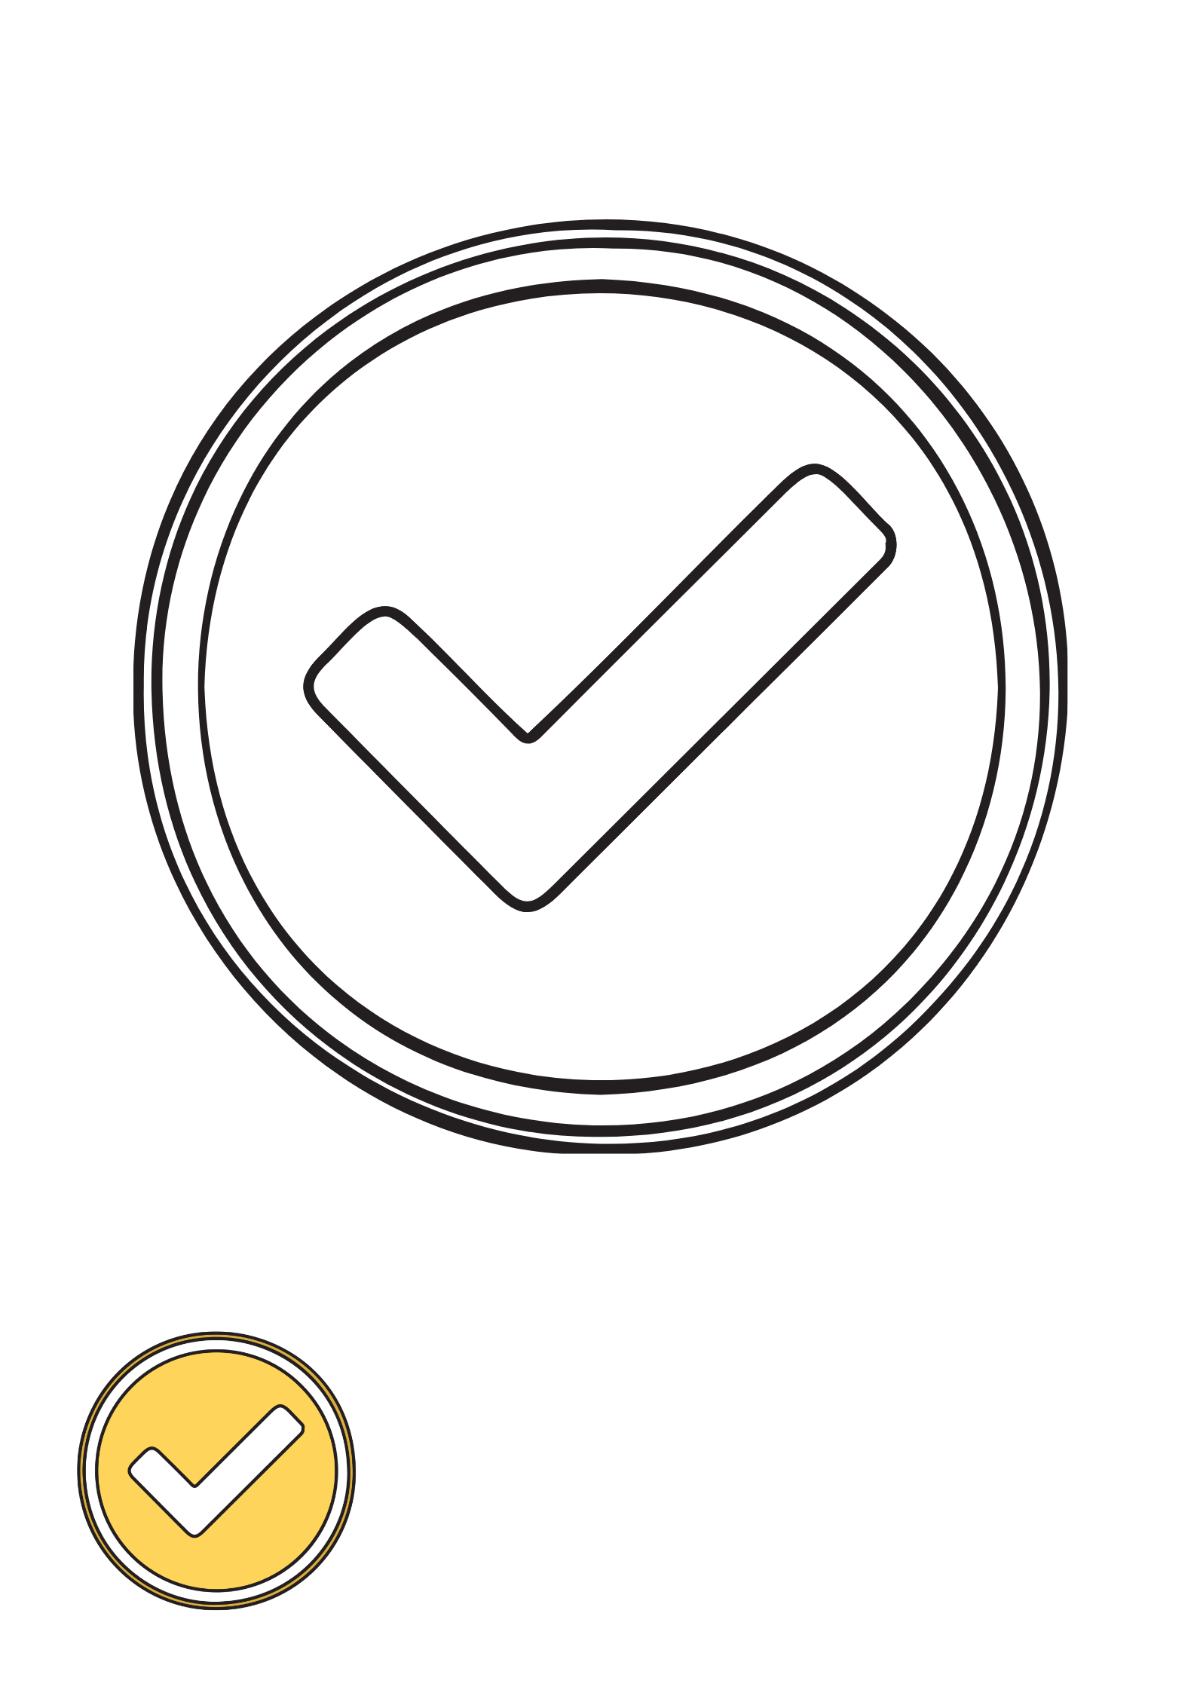 Free Yellow Check Mark coloring page Template